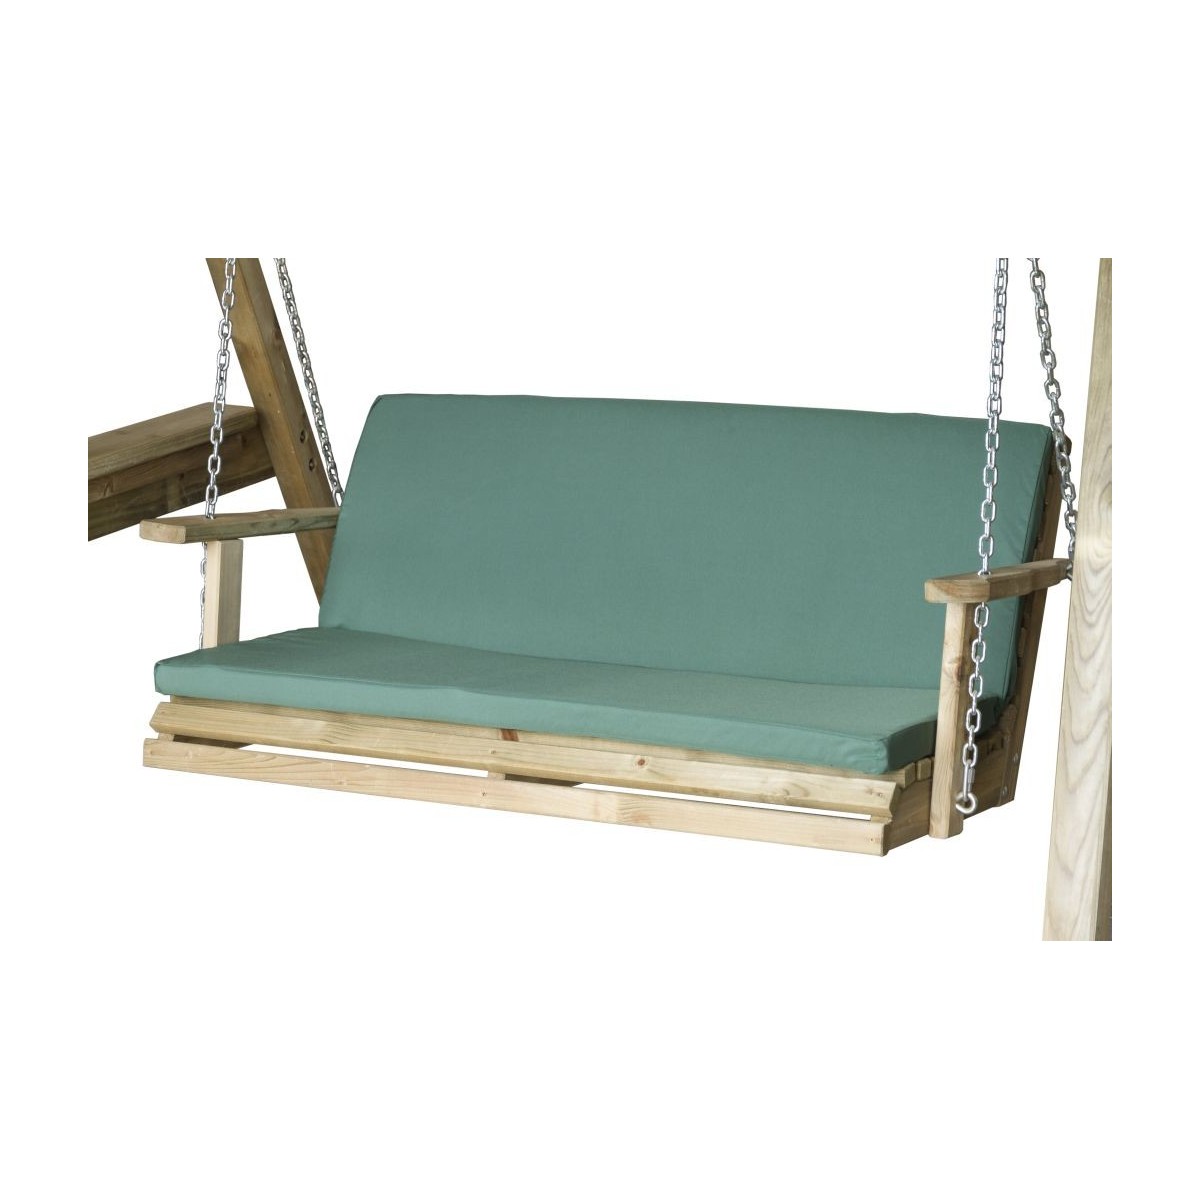 Green Seat pad for 3 seat swing